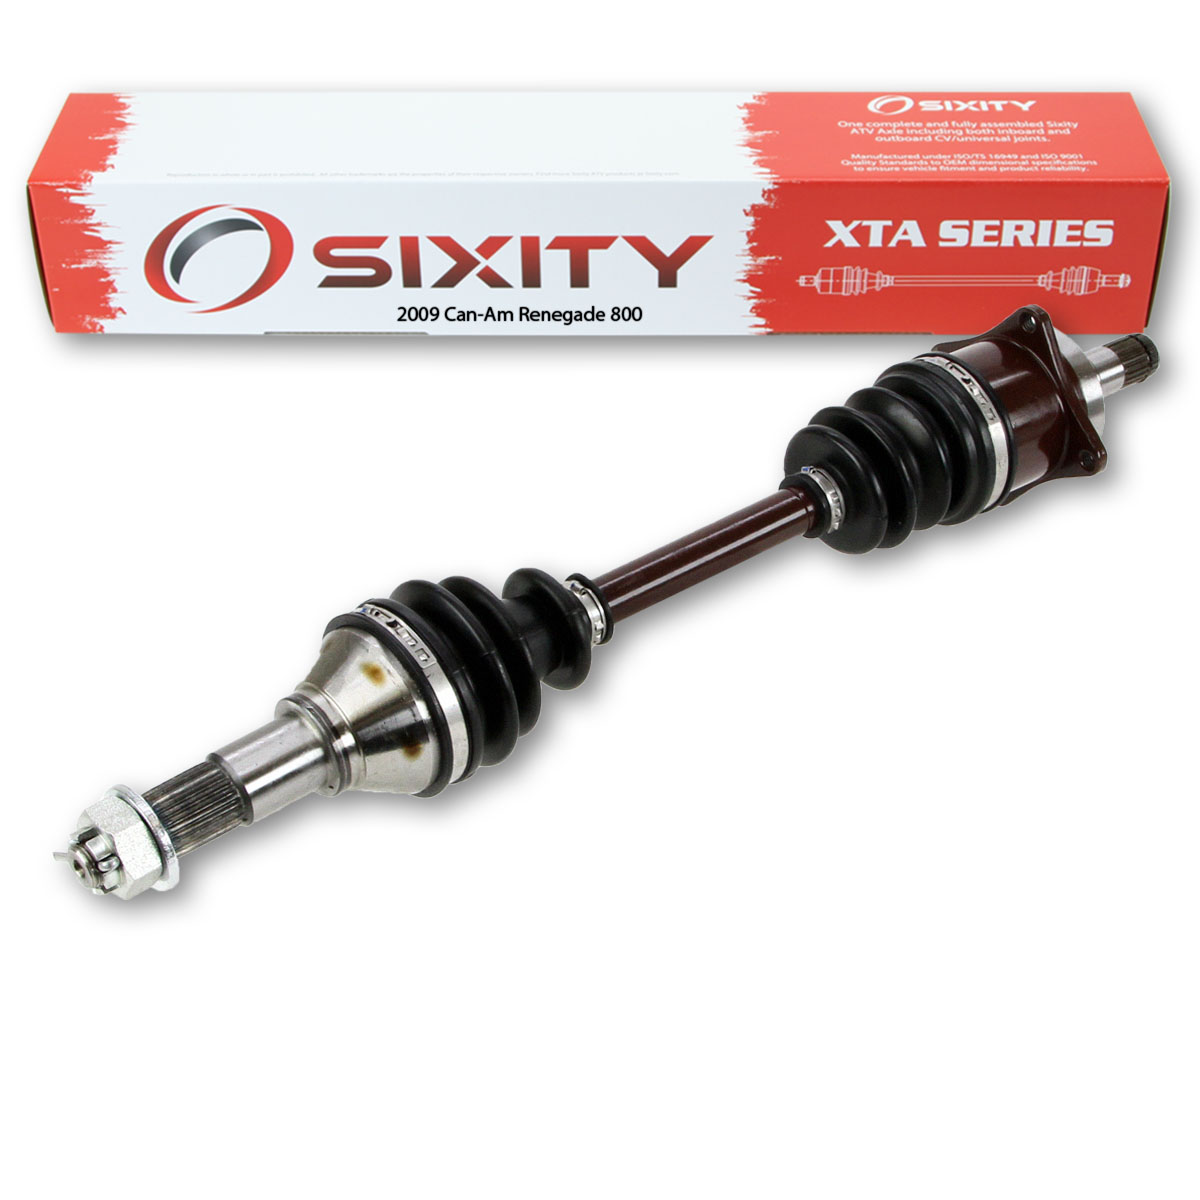 Sixity 2009 Can-Am Renegade 800 4X4 Front Left XTA ATV Axle